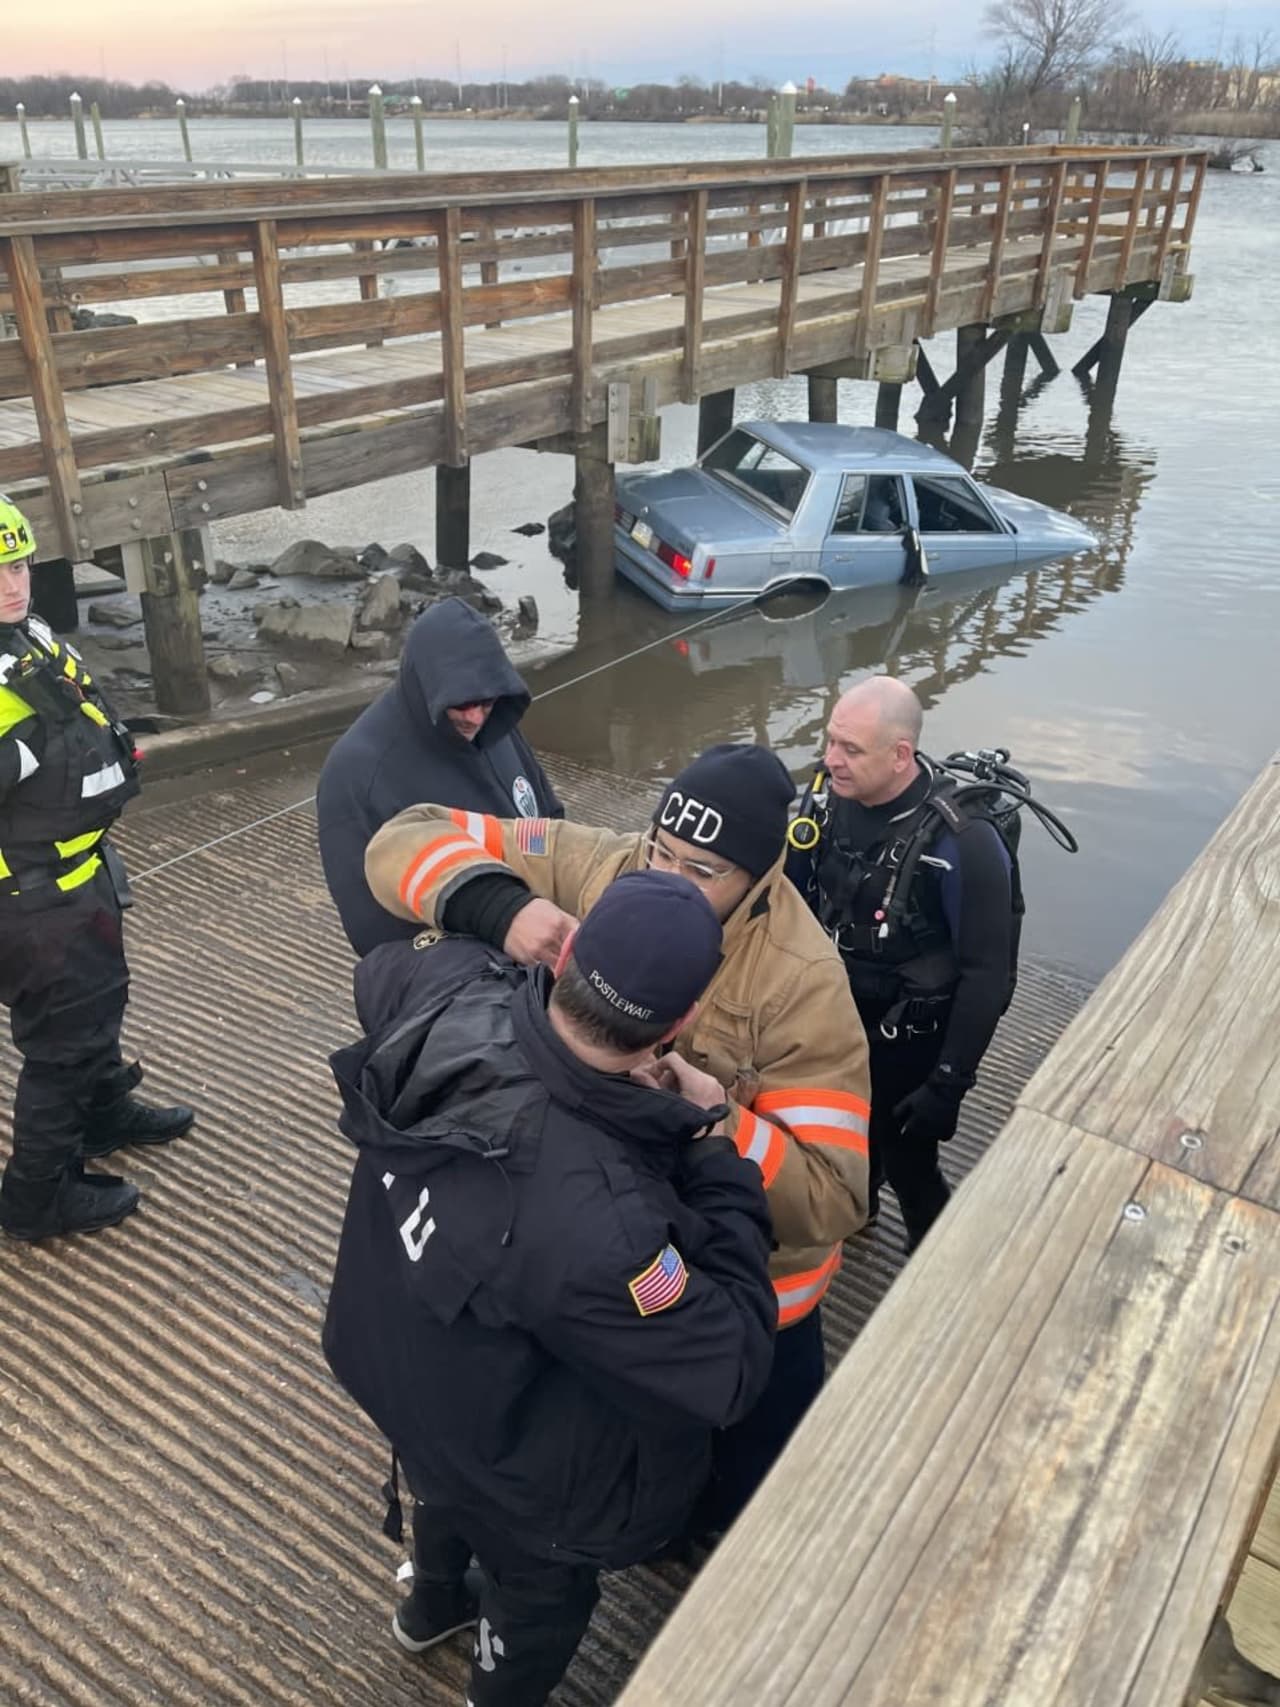 A Ridley driver was rescued from his car after it submerged 15 feet into the Delaware River Monday, authorities said.